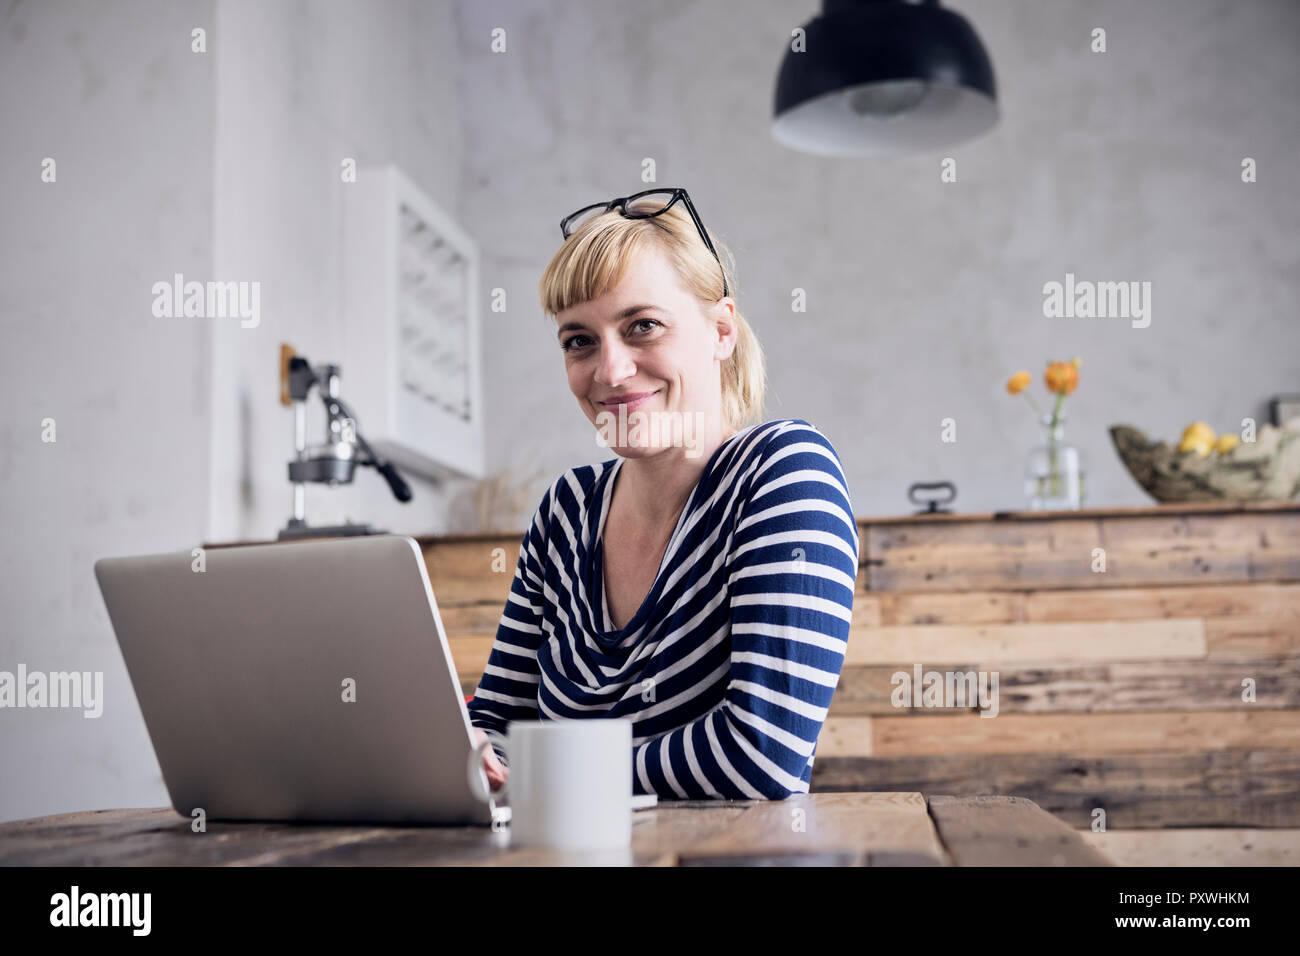 Portrait of smiling woman sitting at table with laptop and coffee mug Stock Photo